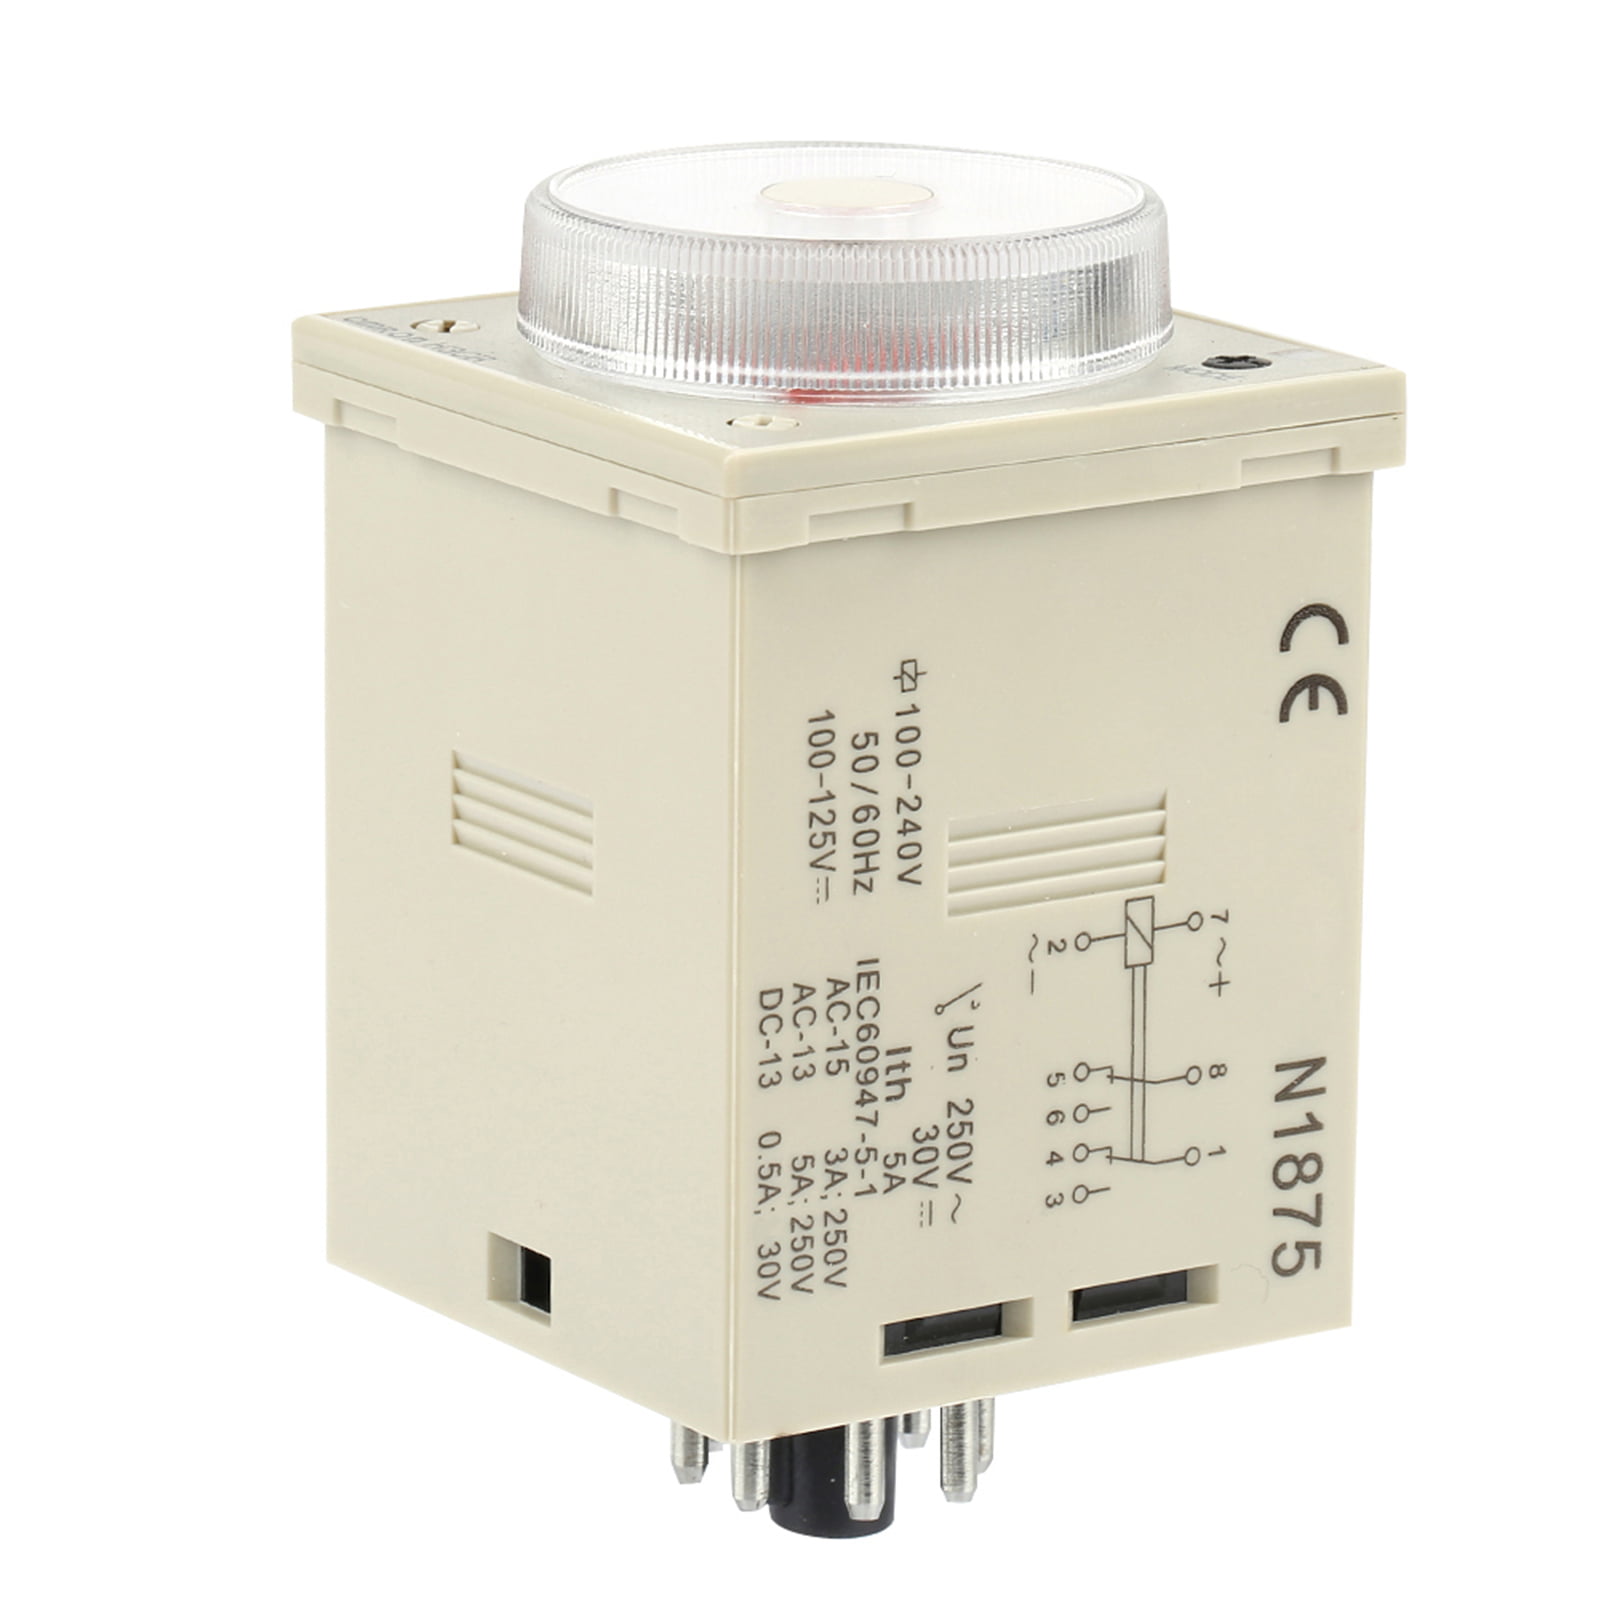 1.2S-300H Knob Control Time Relay 8-Pin 100-240VAC 100-125VDC,Delay Timer Relay,High Accuracy Large Contact Capacity. H3CR-A8 Delay Timer Relay